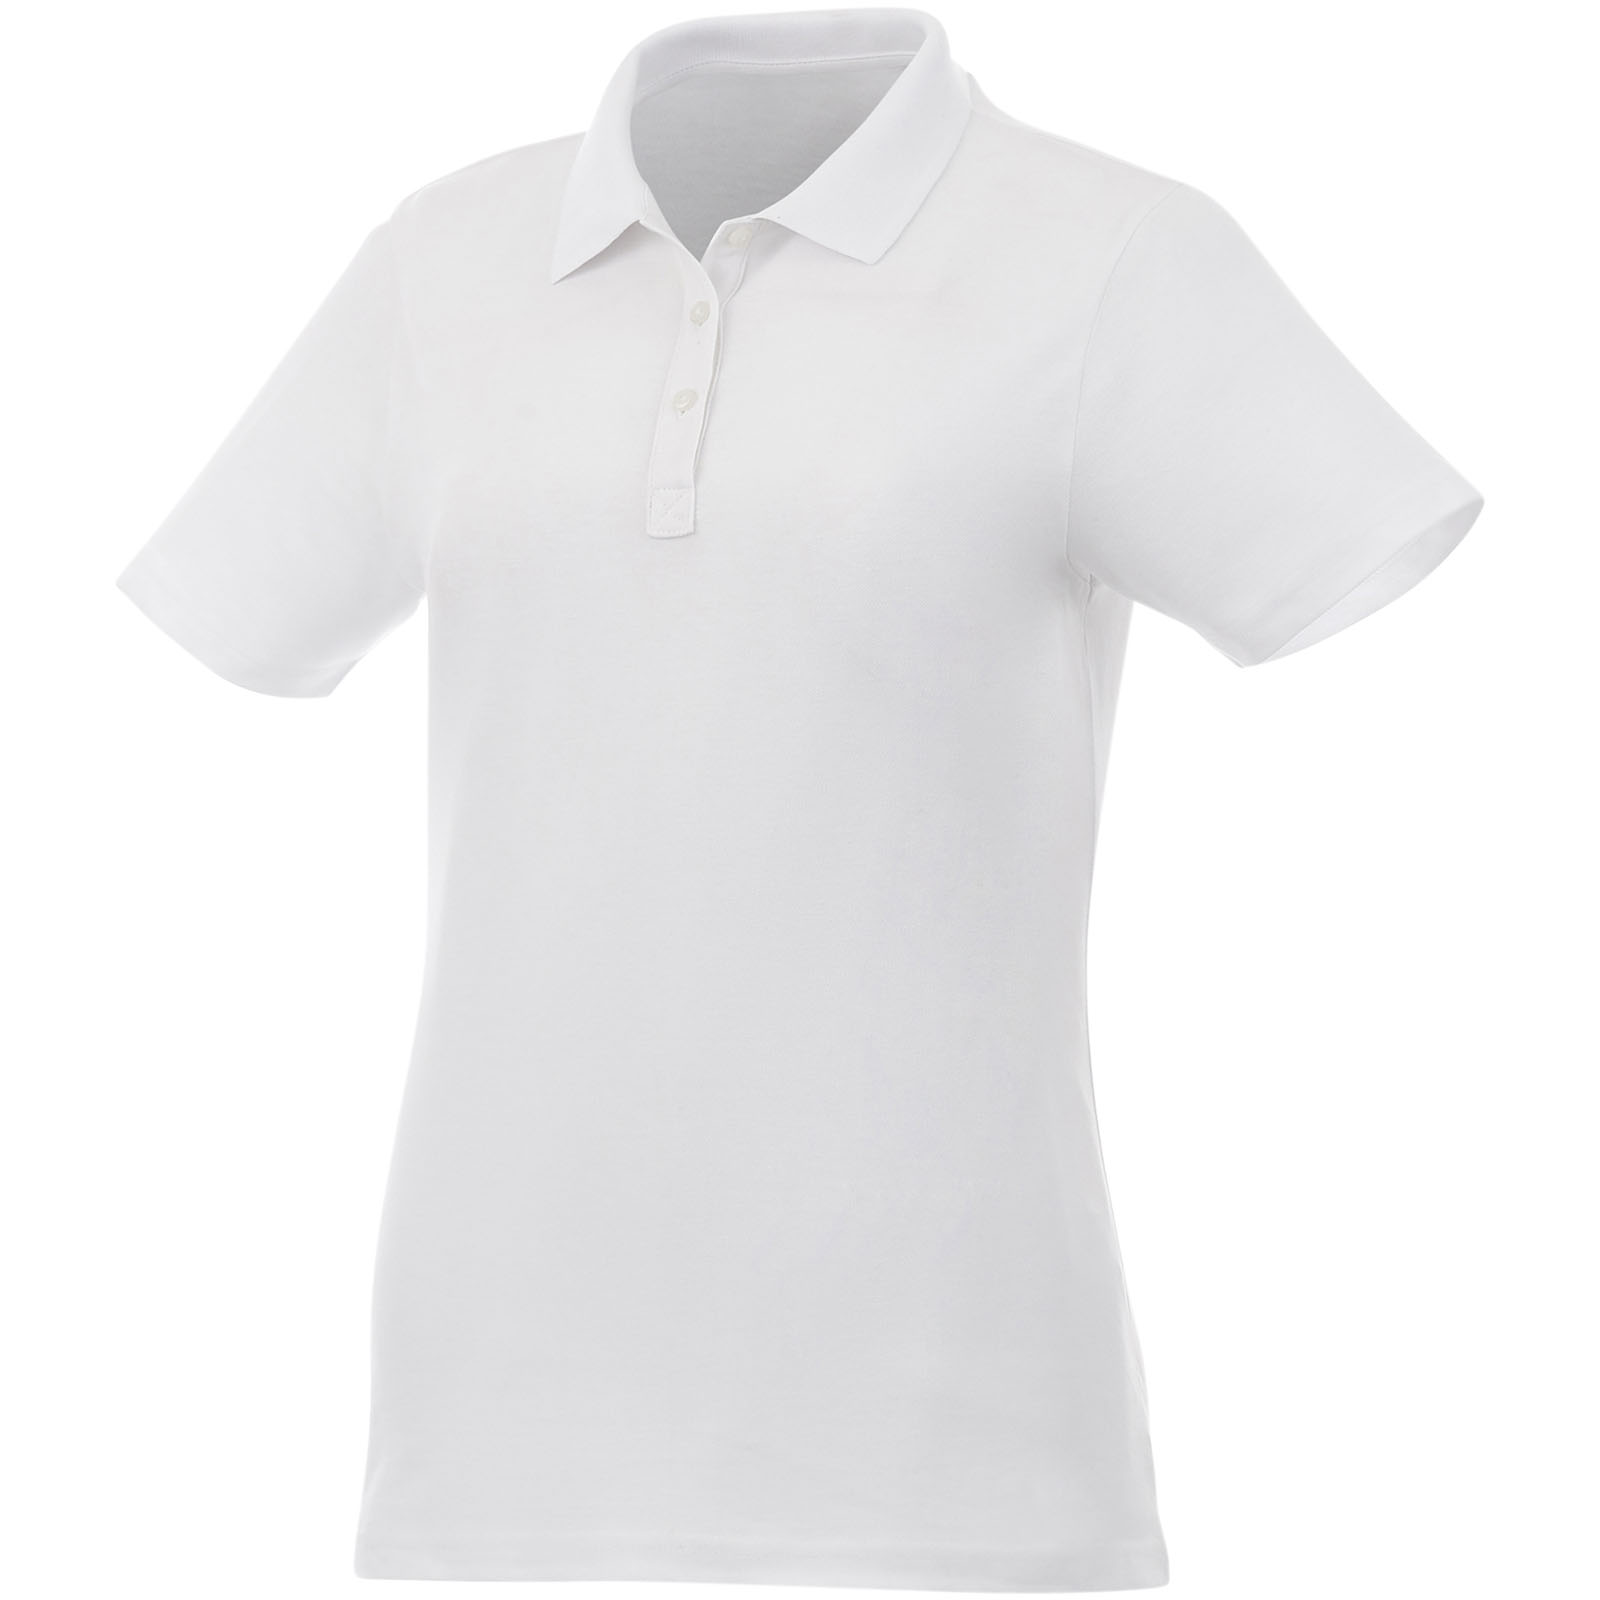 Personalised polo shirt from a specific brand - Ramsbottom